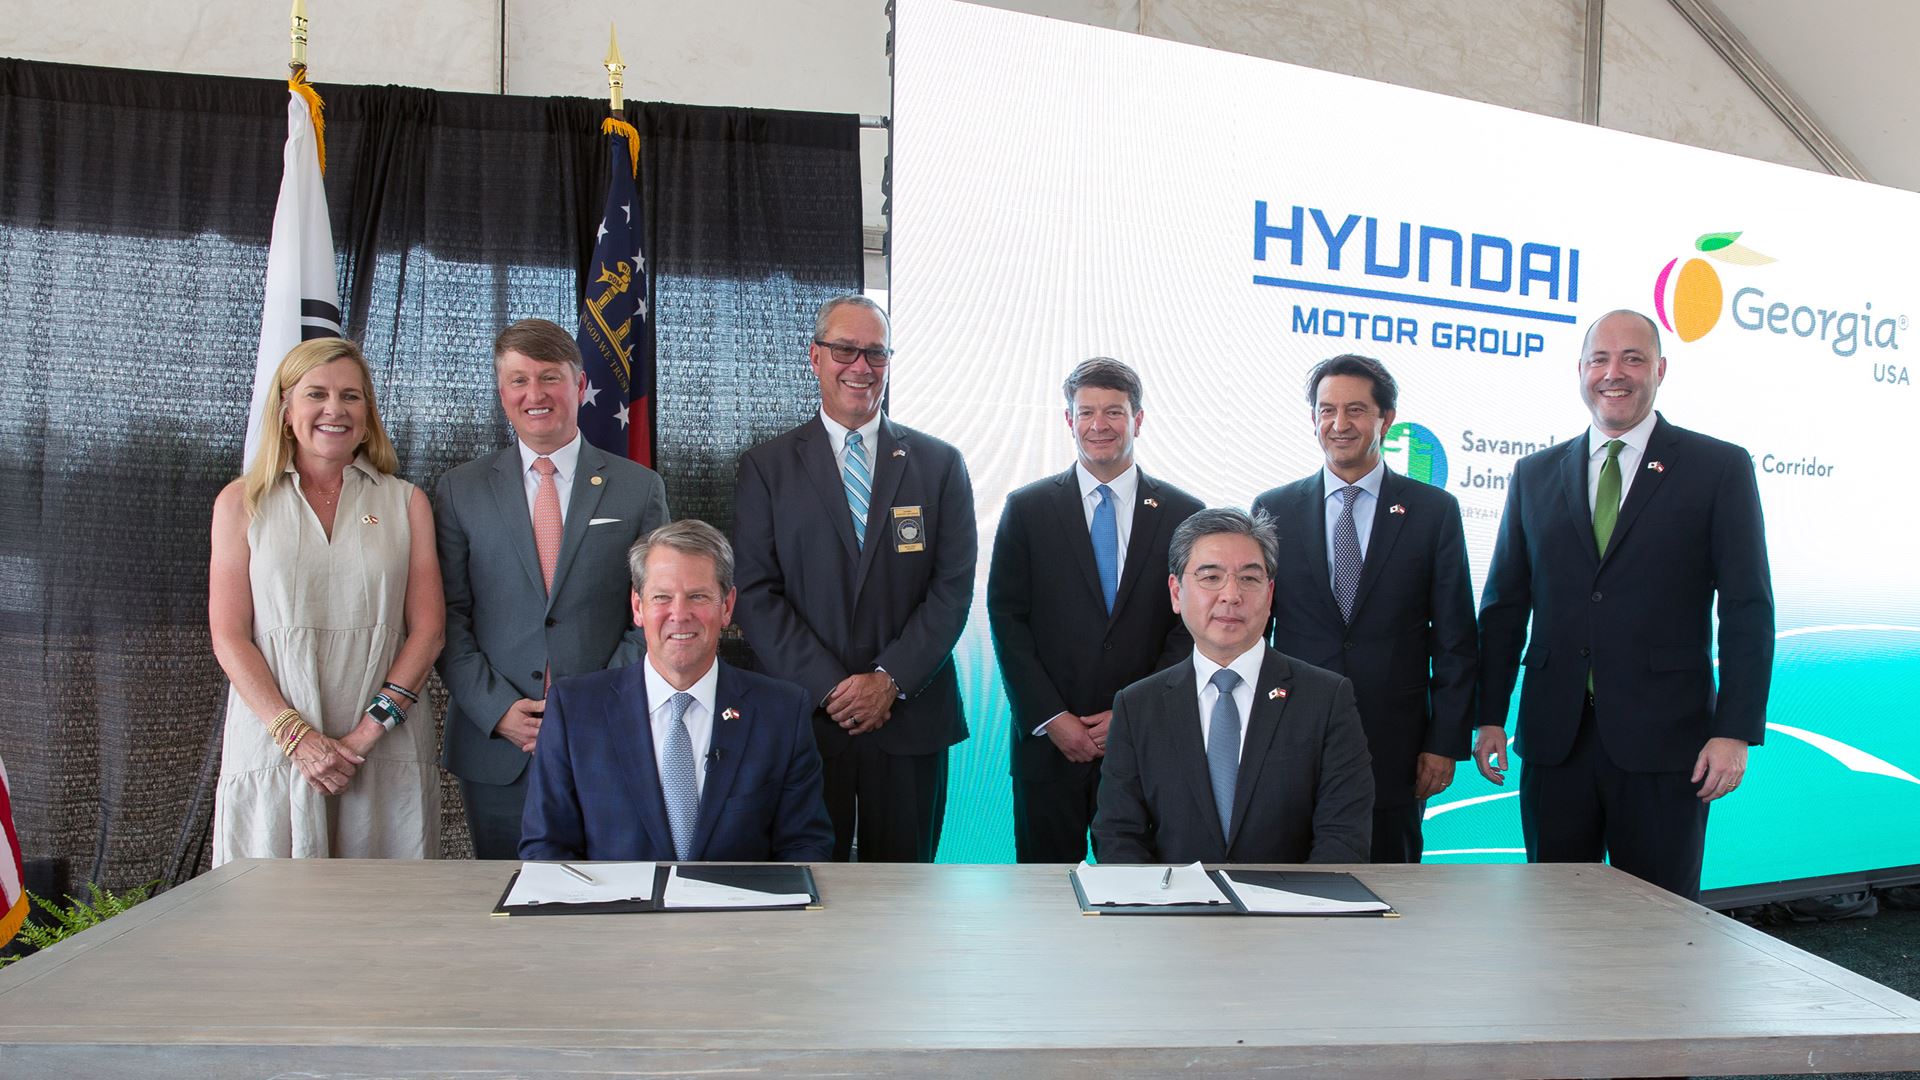 Hyundai Motor Group to Establish First dedicated EV Plant and Battery Manufacturing Facility in the U.S.